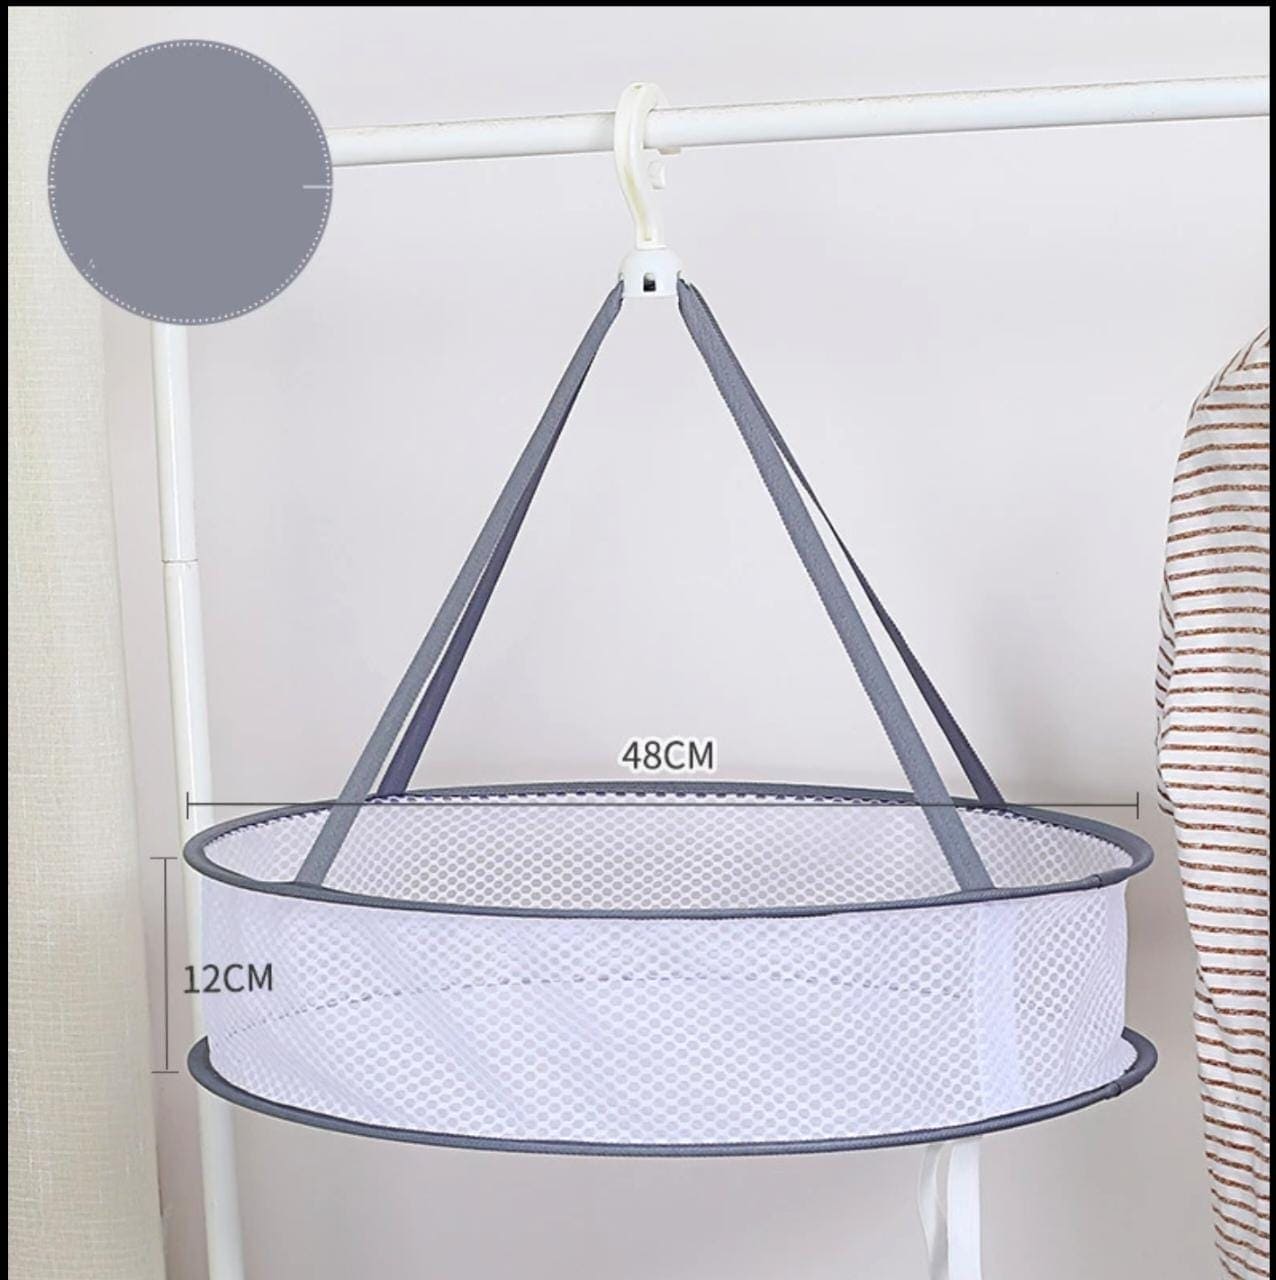 Clothes Drying Basket, Hanging Sweater Net Pocket, Thickened Anti-Deformation Cardigan Drying Rack, Double Layer Socks Drying Bag, Drawing Laundry Basket